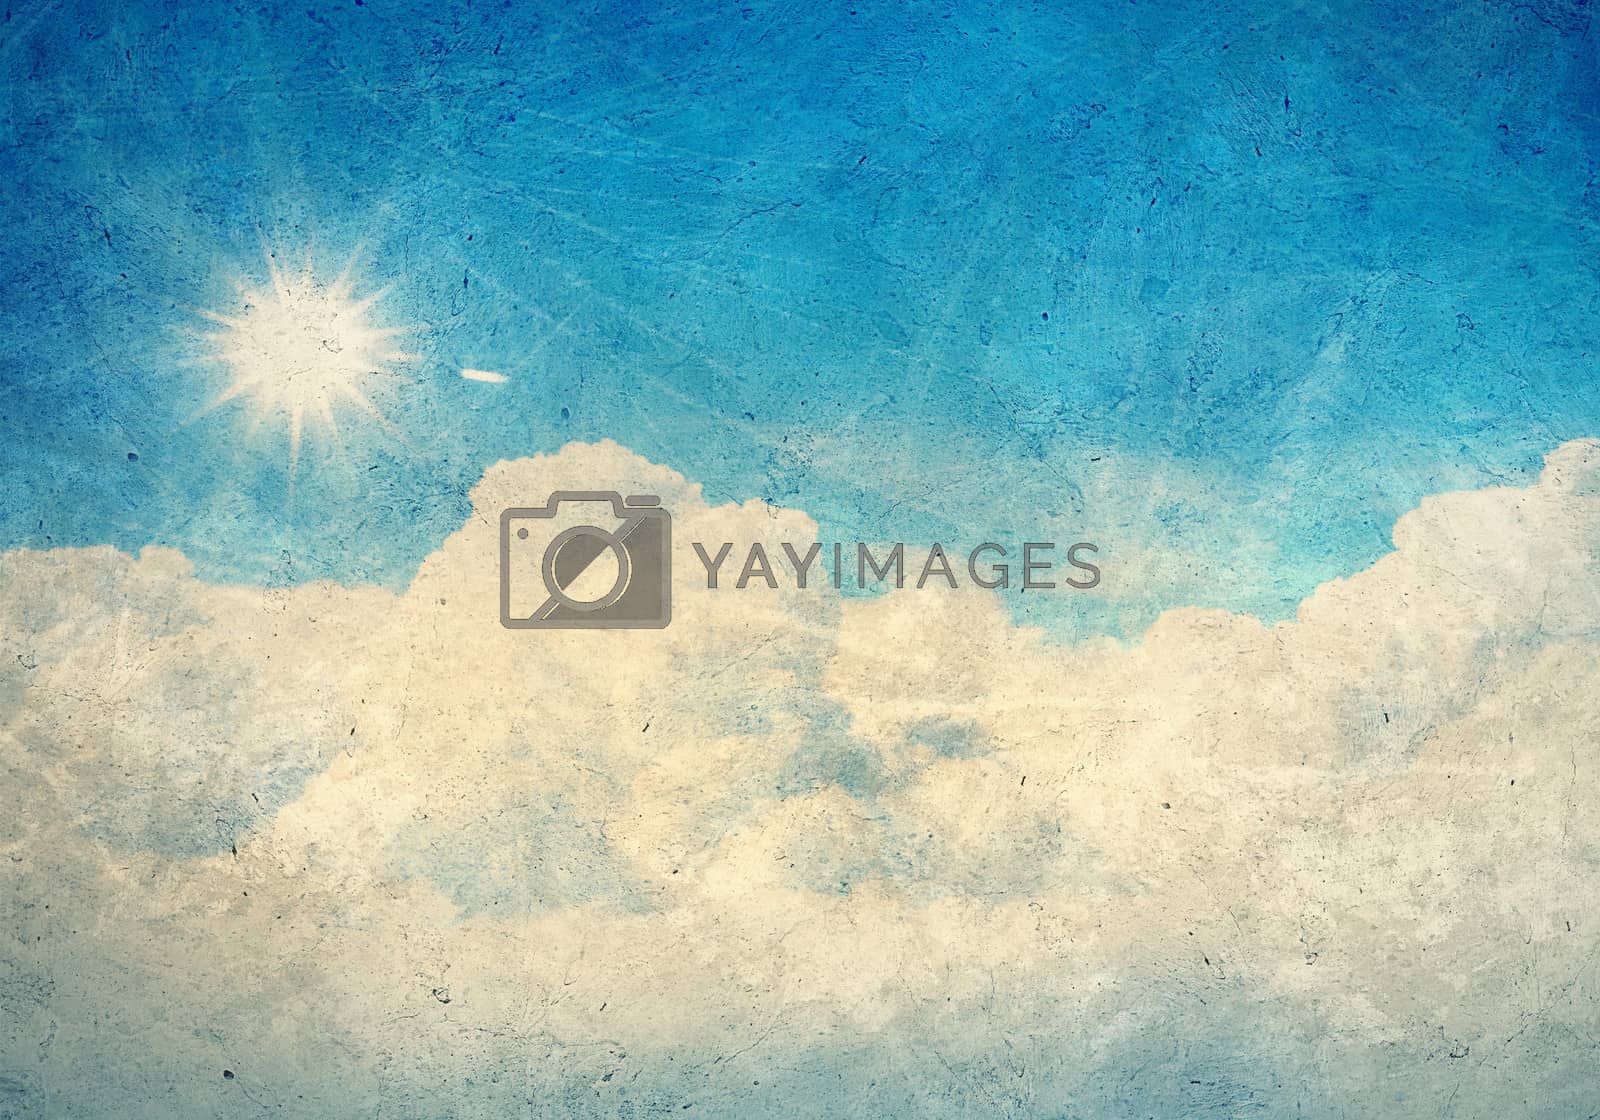 Royalty free image of Cloudy sky by sergey_nivens